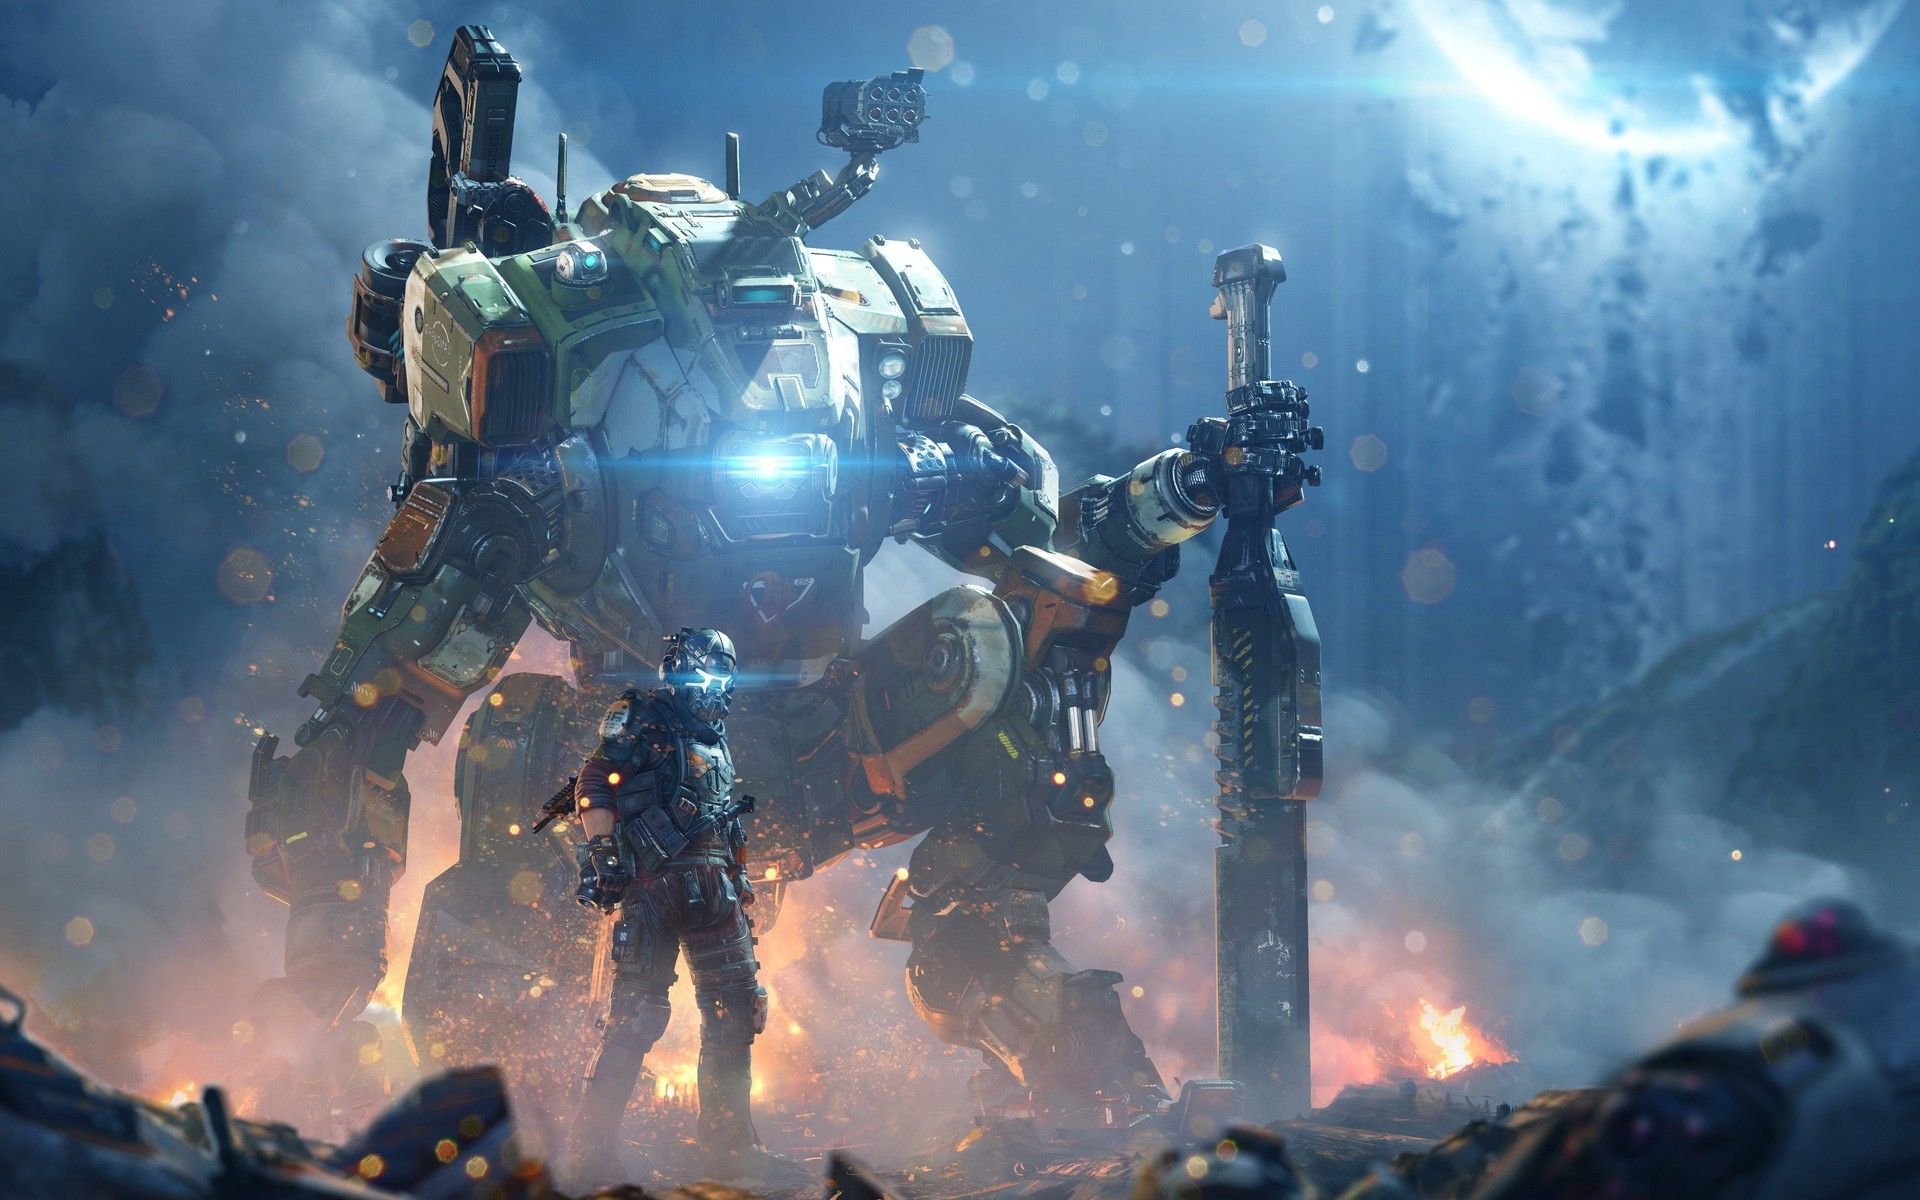 This has to be one of my if not the favourite picture relating to titanfall. Its just so perfect